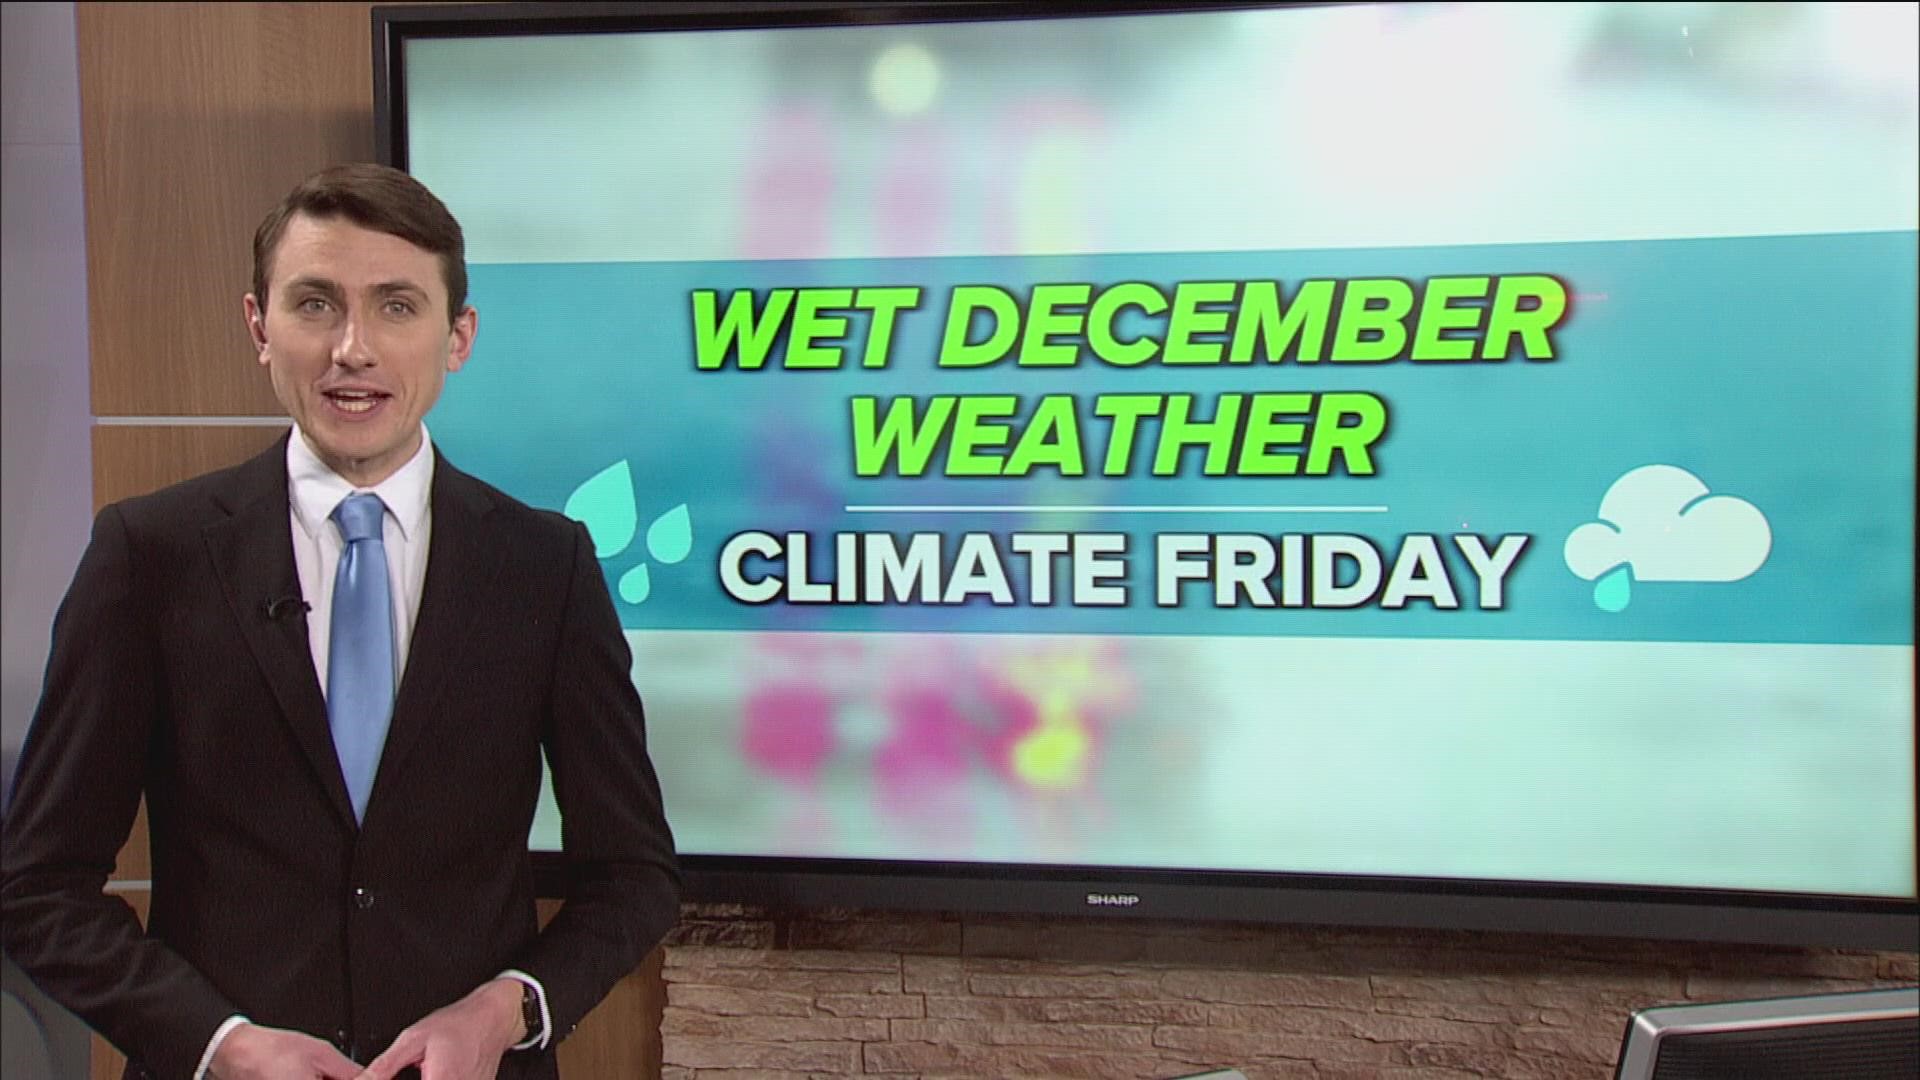 Climate change is making wet December weather more common than in previous years.